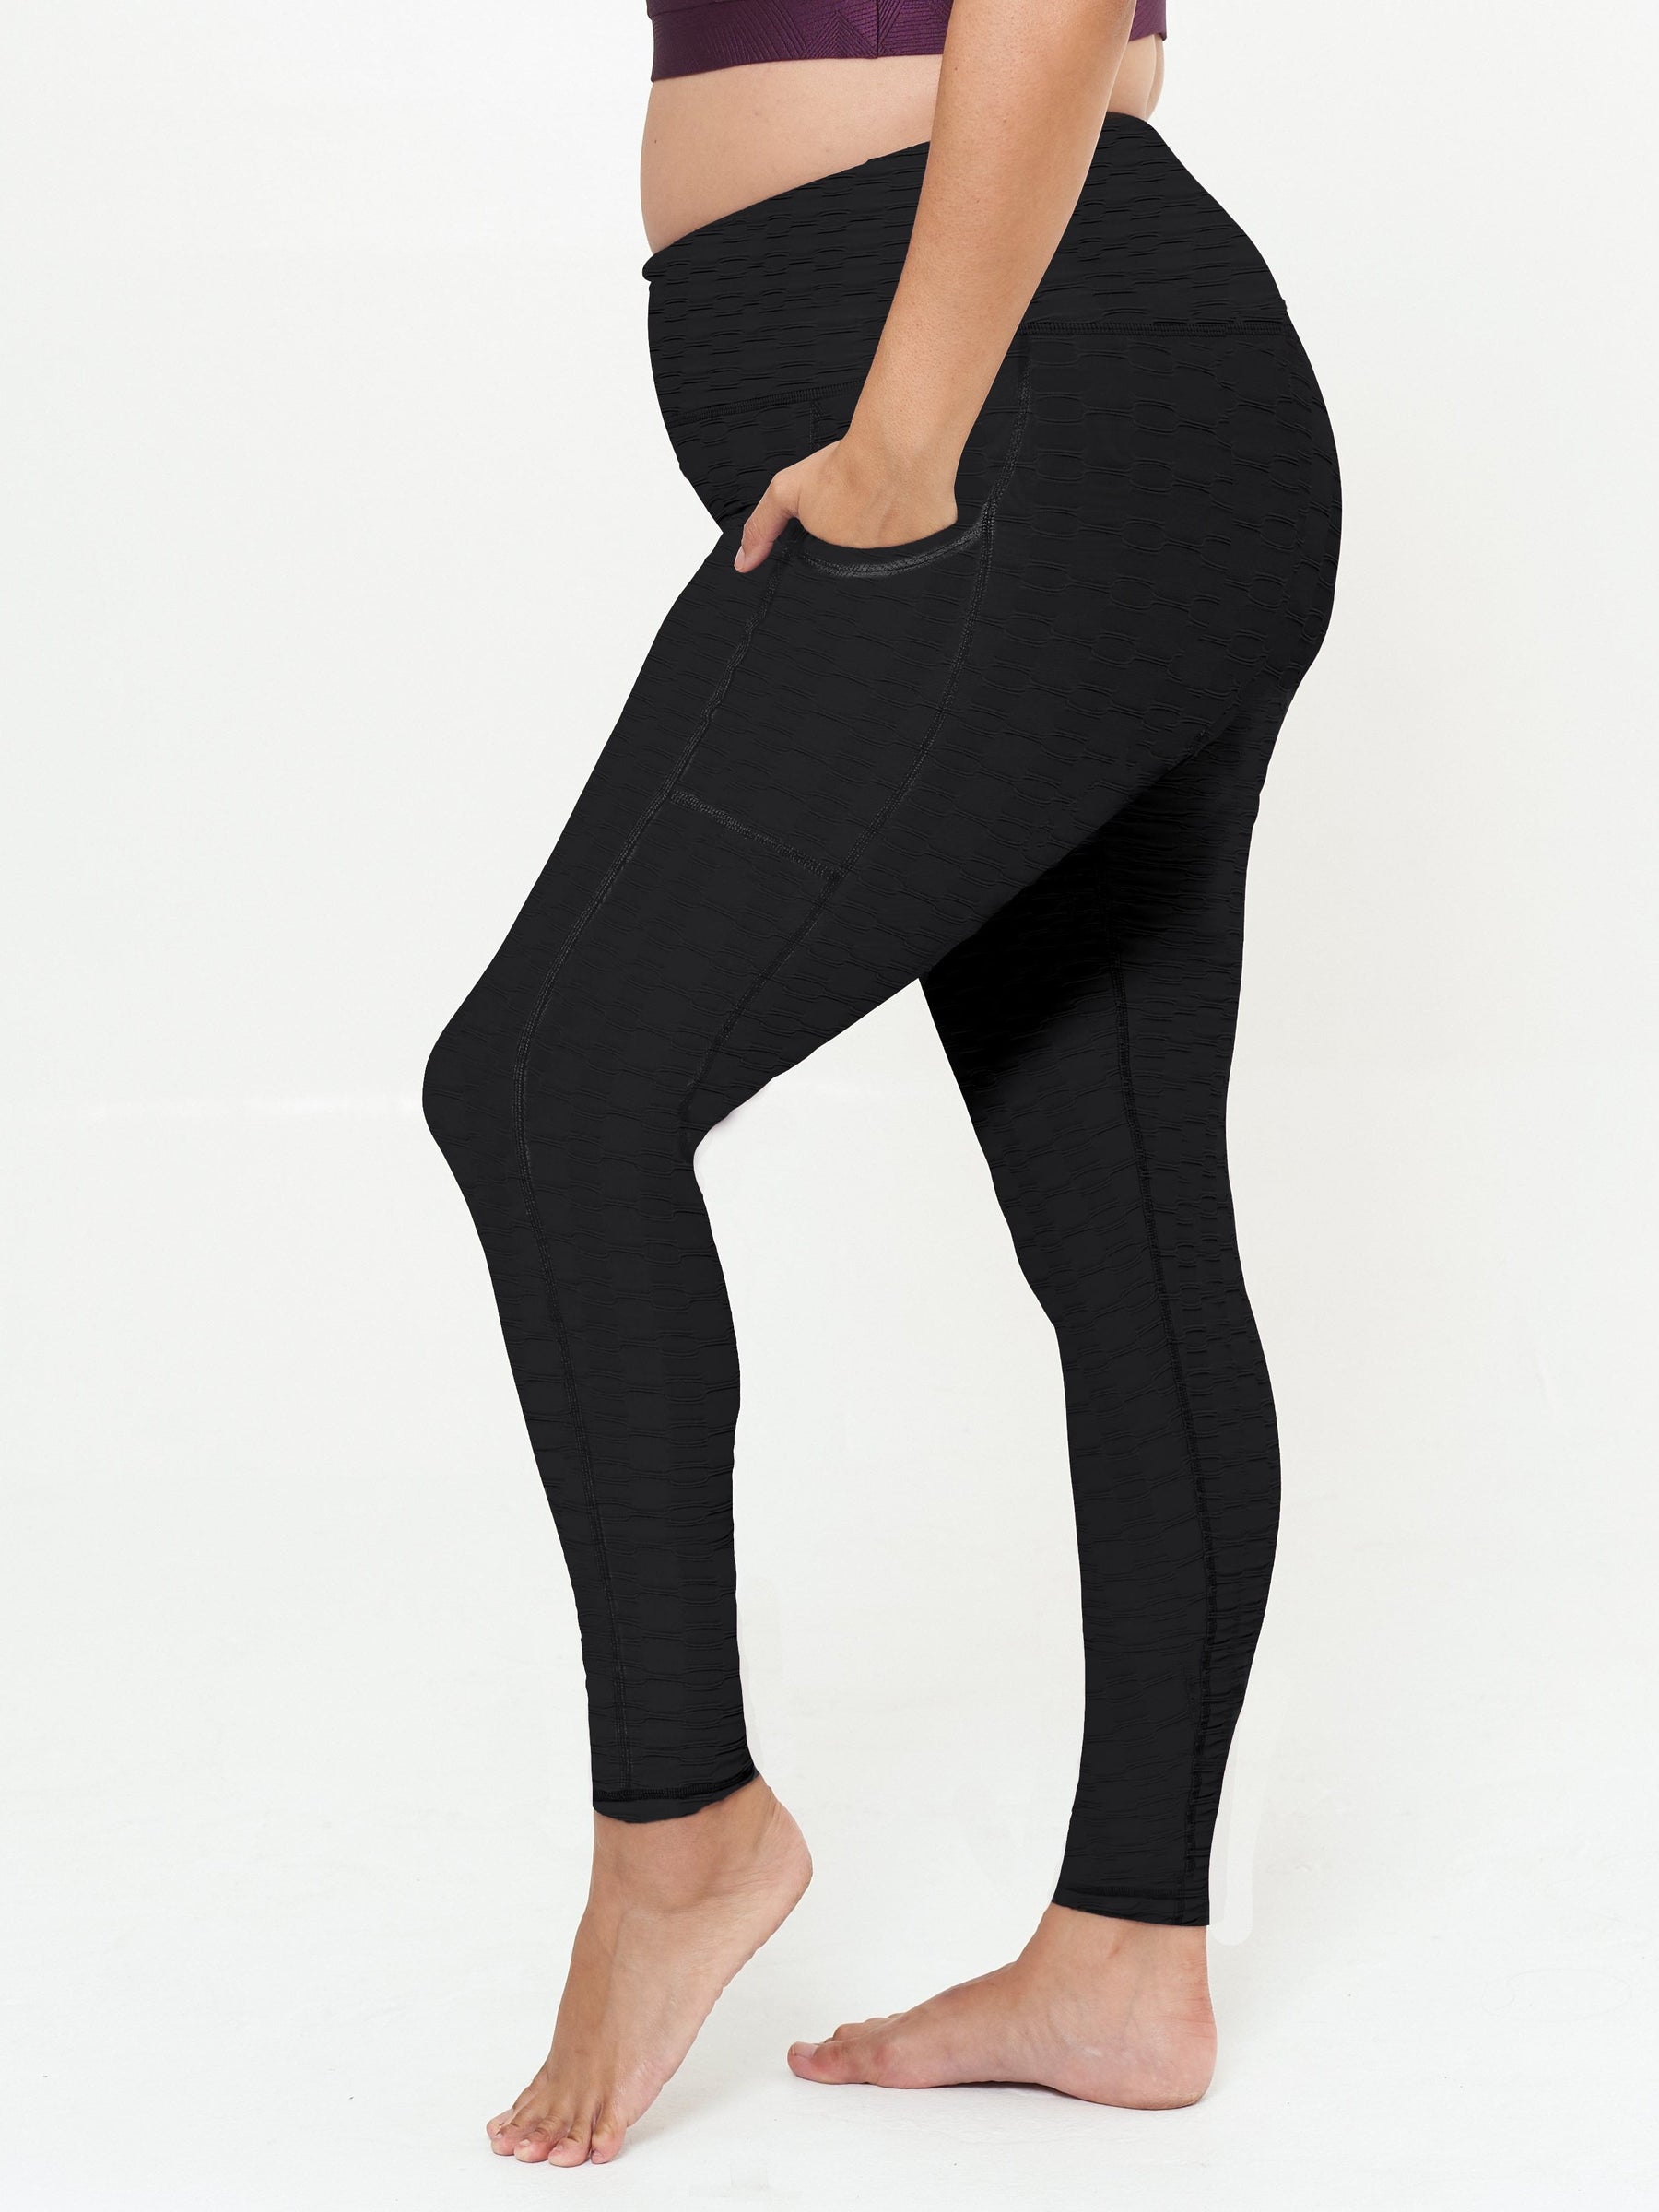 Thick, stretchy & so flattering' Next shoppers rave about 'best  high-waisted leggings' that are a 'fantastic price